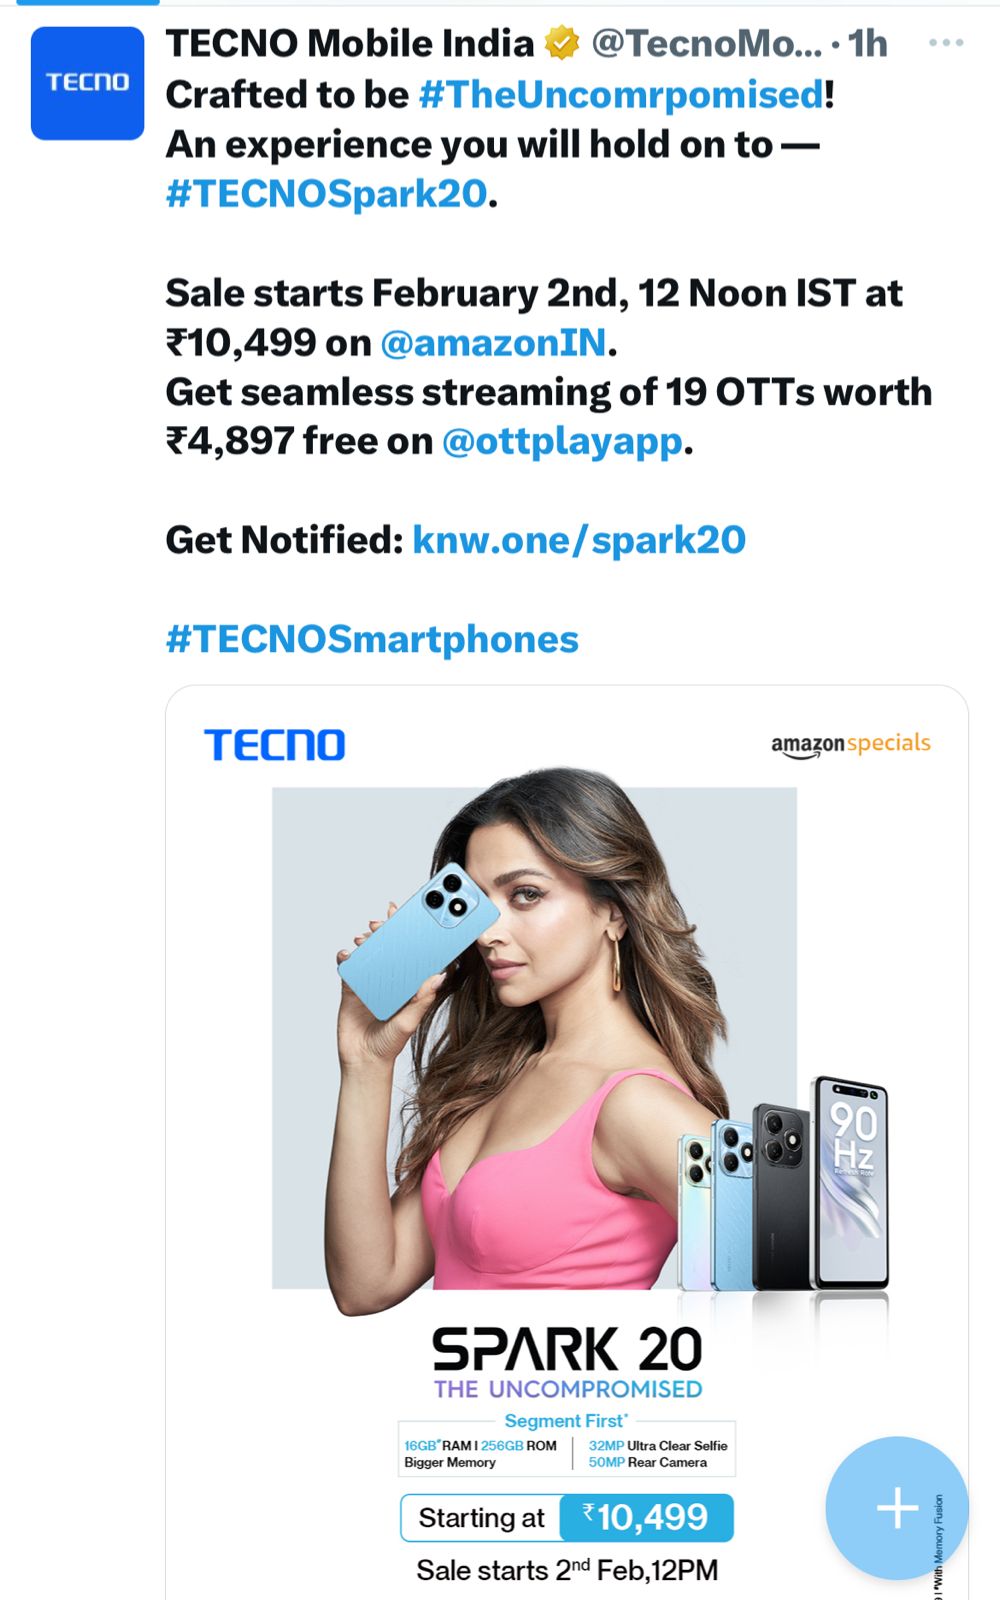 Tecno Spark 20 priced at Rs 10,499 with 8GB RAM and 256GB storage.